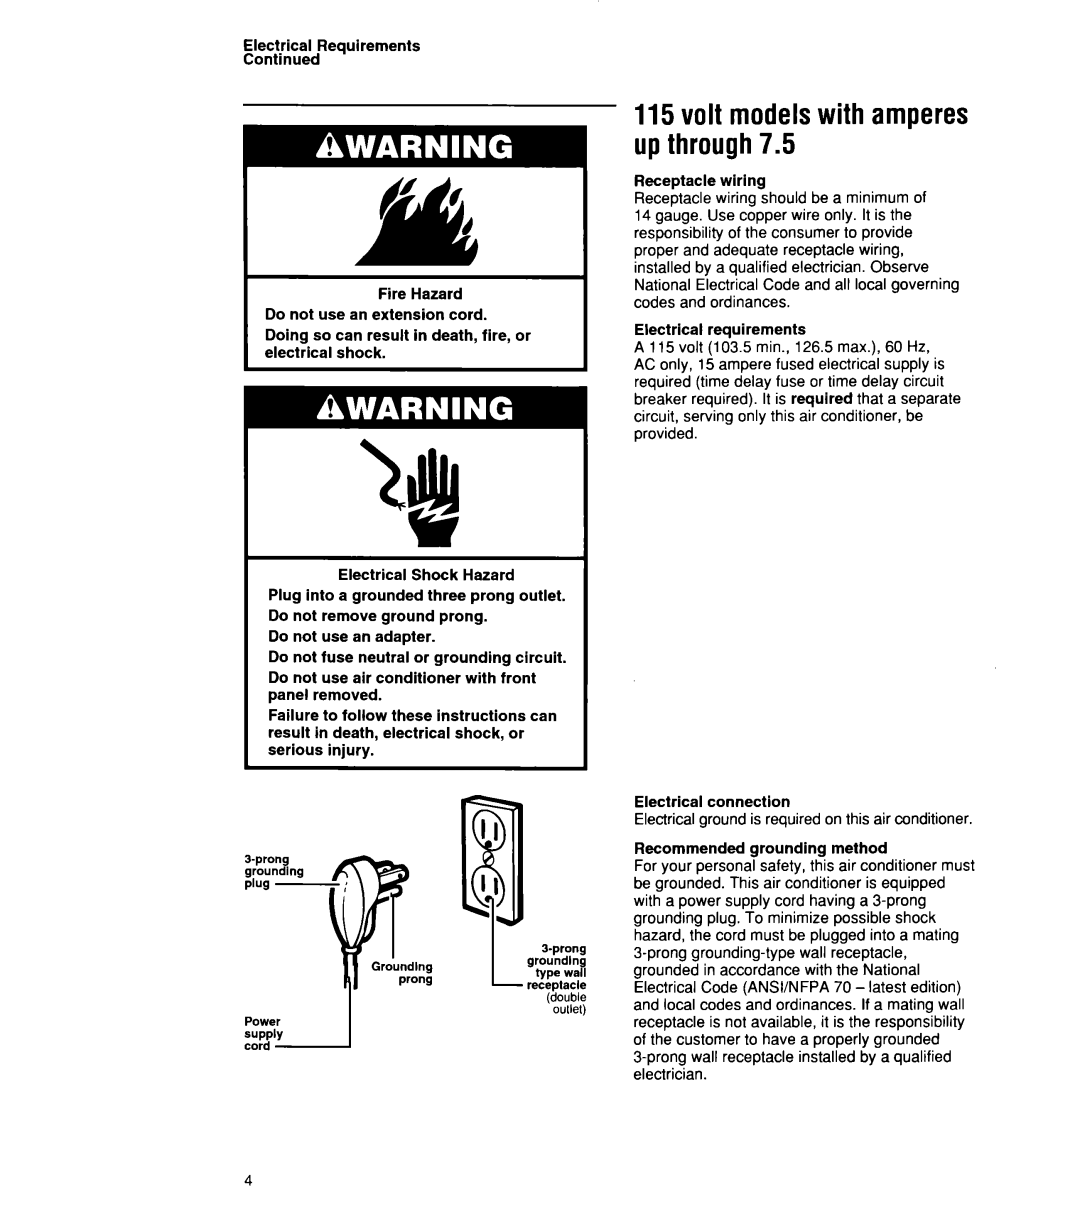 Whirlpool ACU072XE installation instructions upthrough7.5, 115volt modelswith amperes 